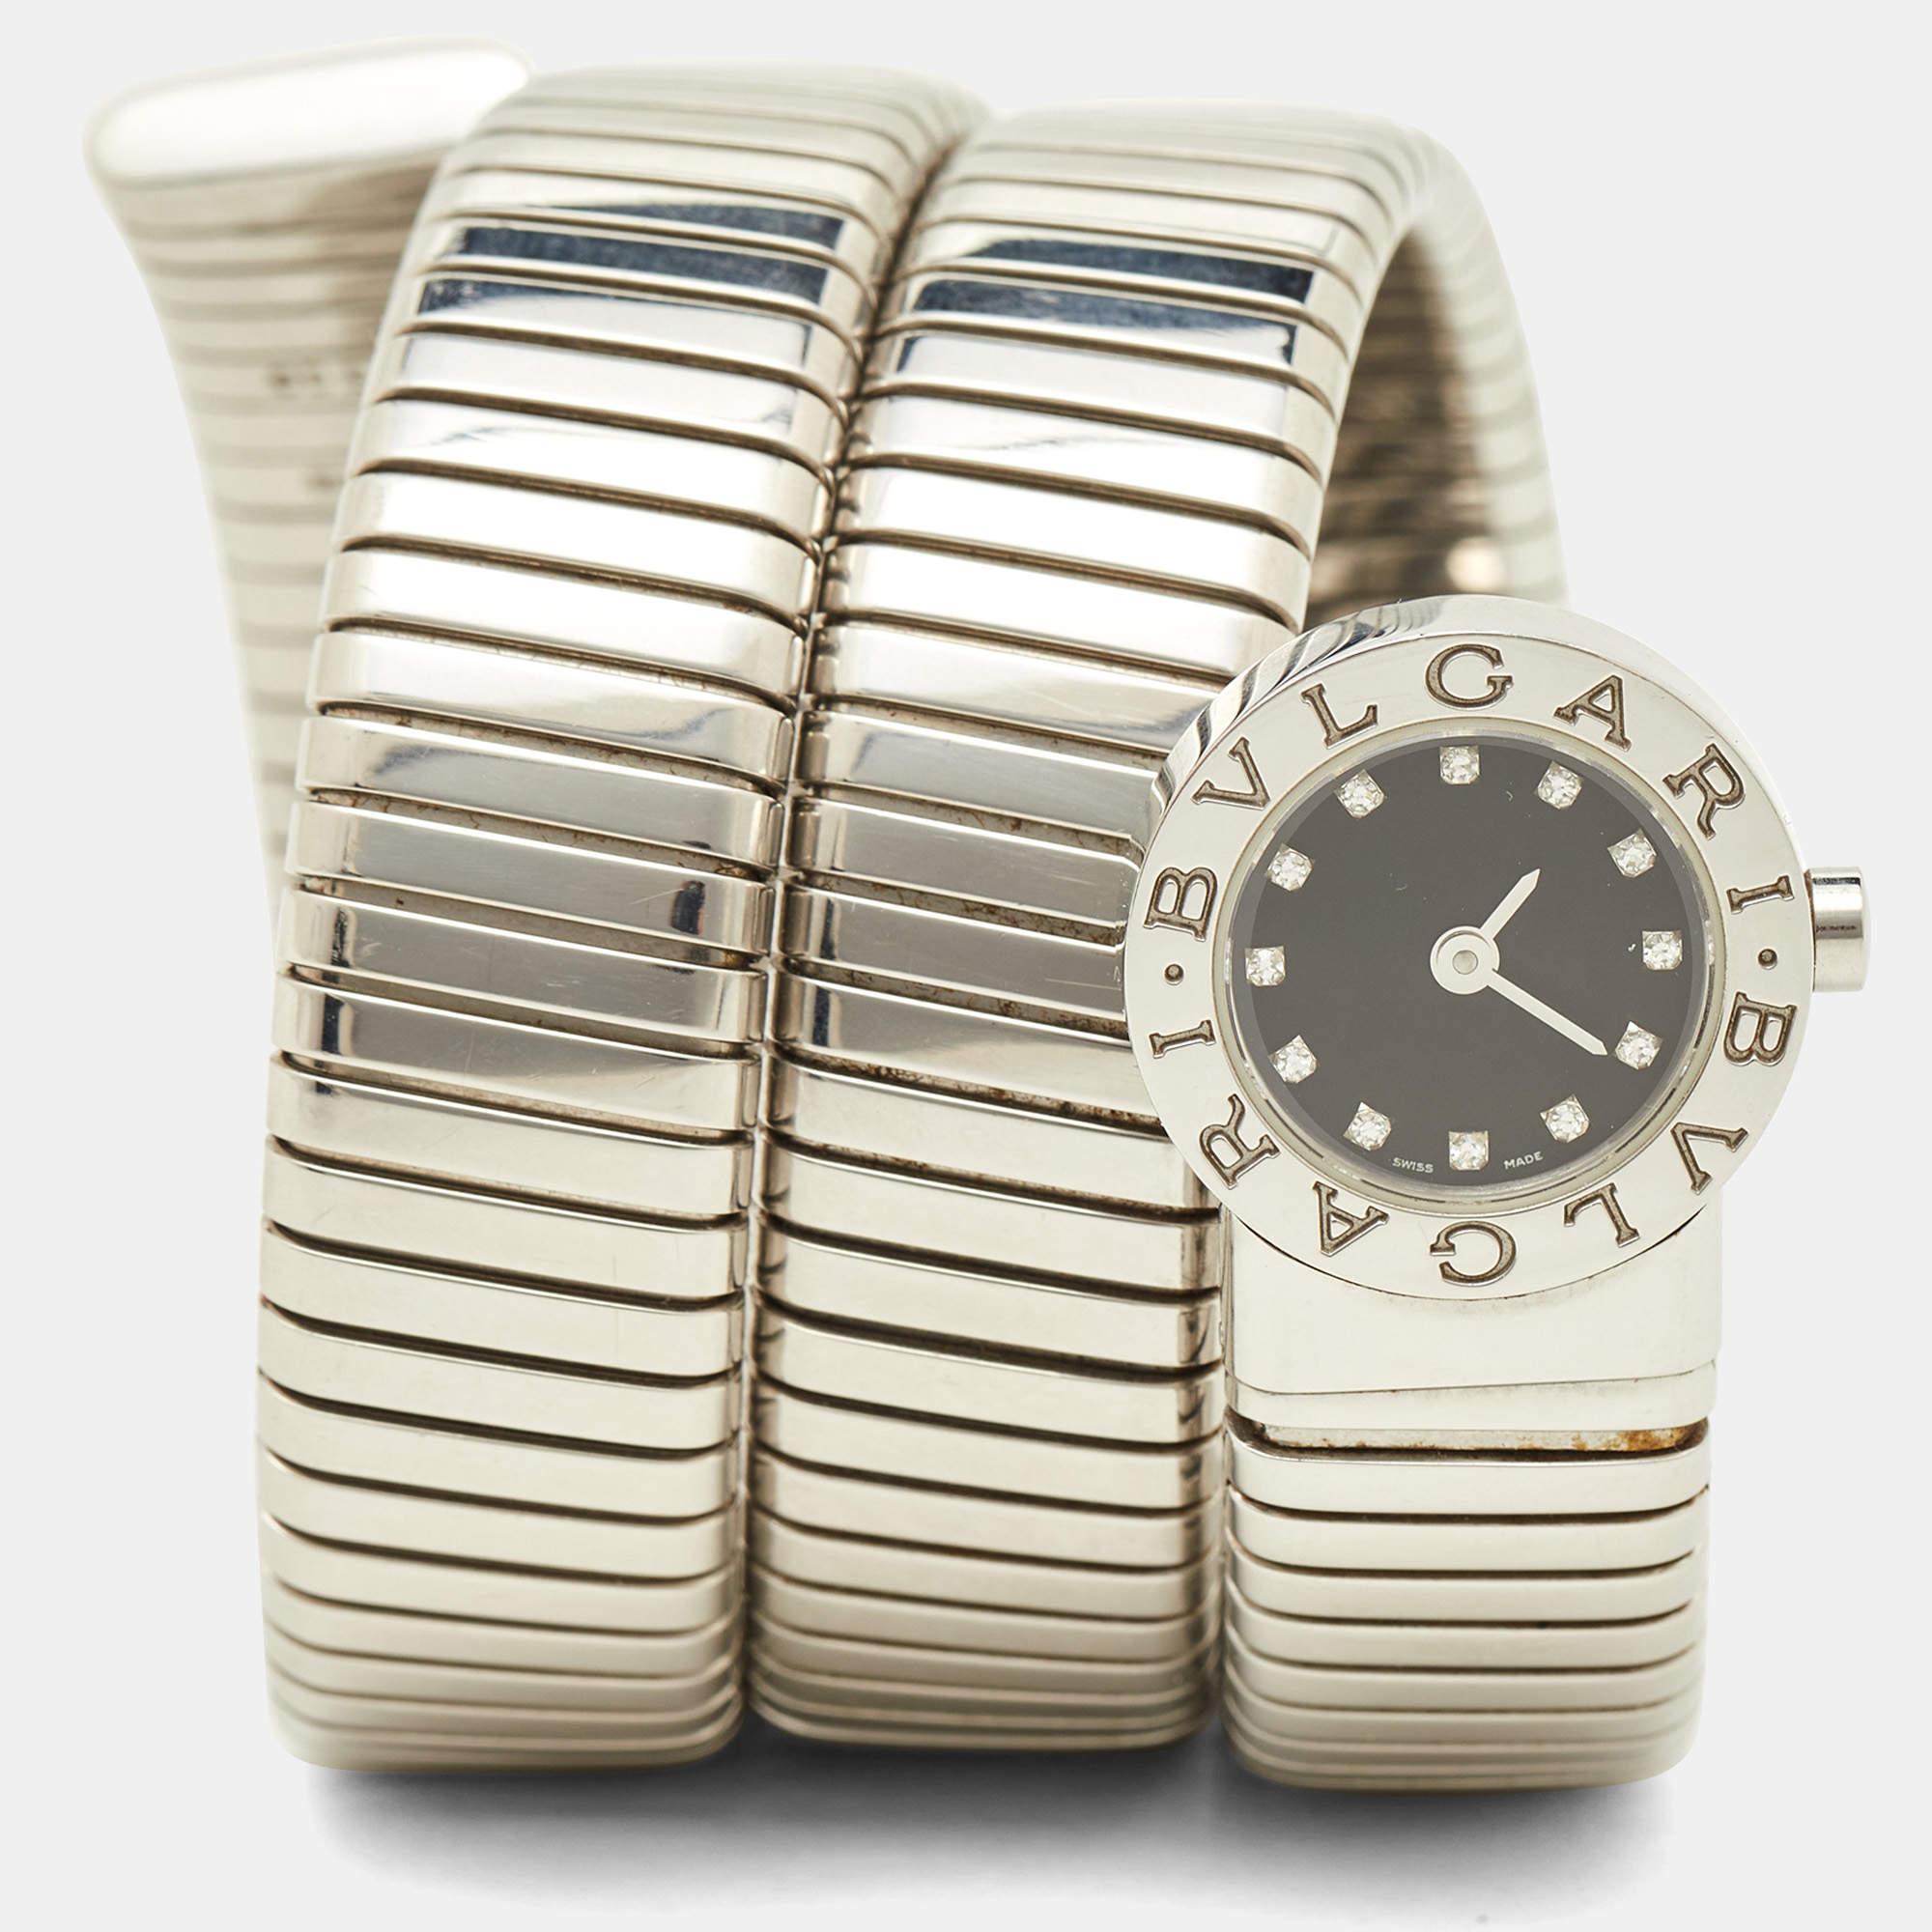 Exuding glamour and unique style, the Bvlgari wristwatch flaunts the brand's popular design: Tubogas. The stainless steel body, spiraled twice, features the fine lines of the Tubogas technique. Its black dial is equipped with diamond hour markers